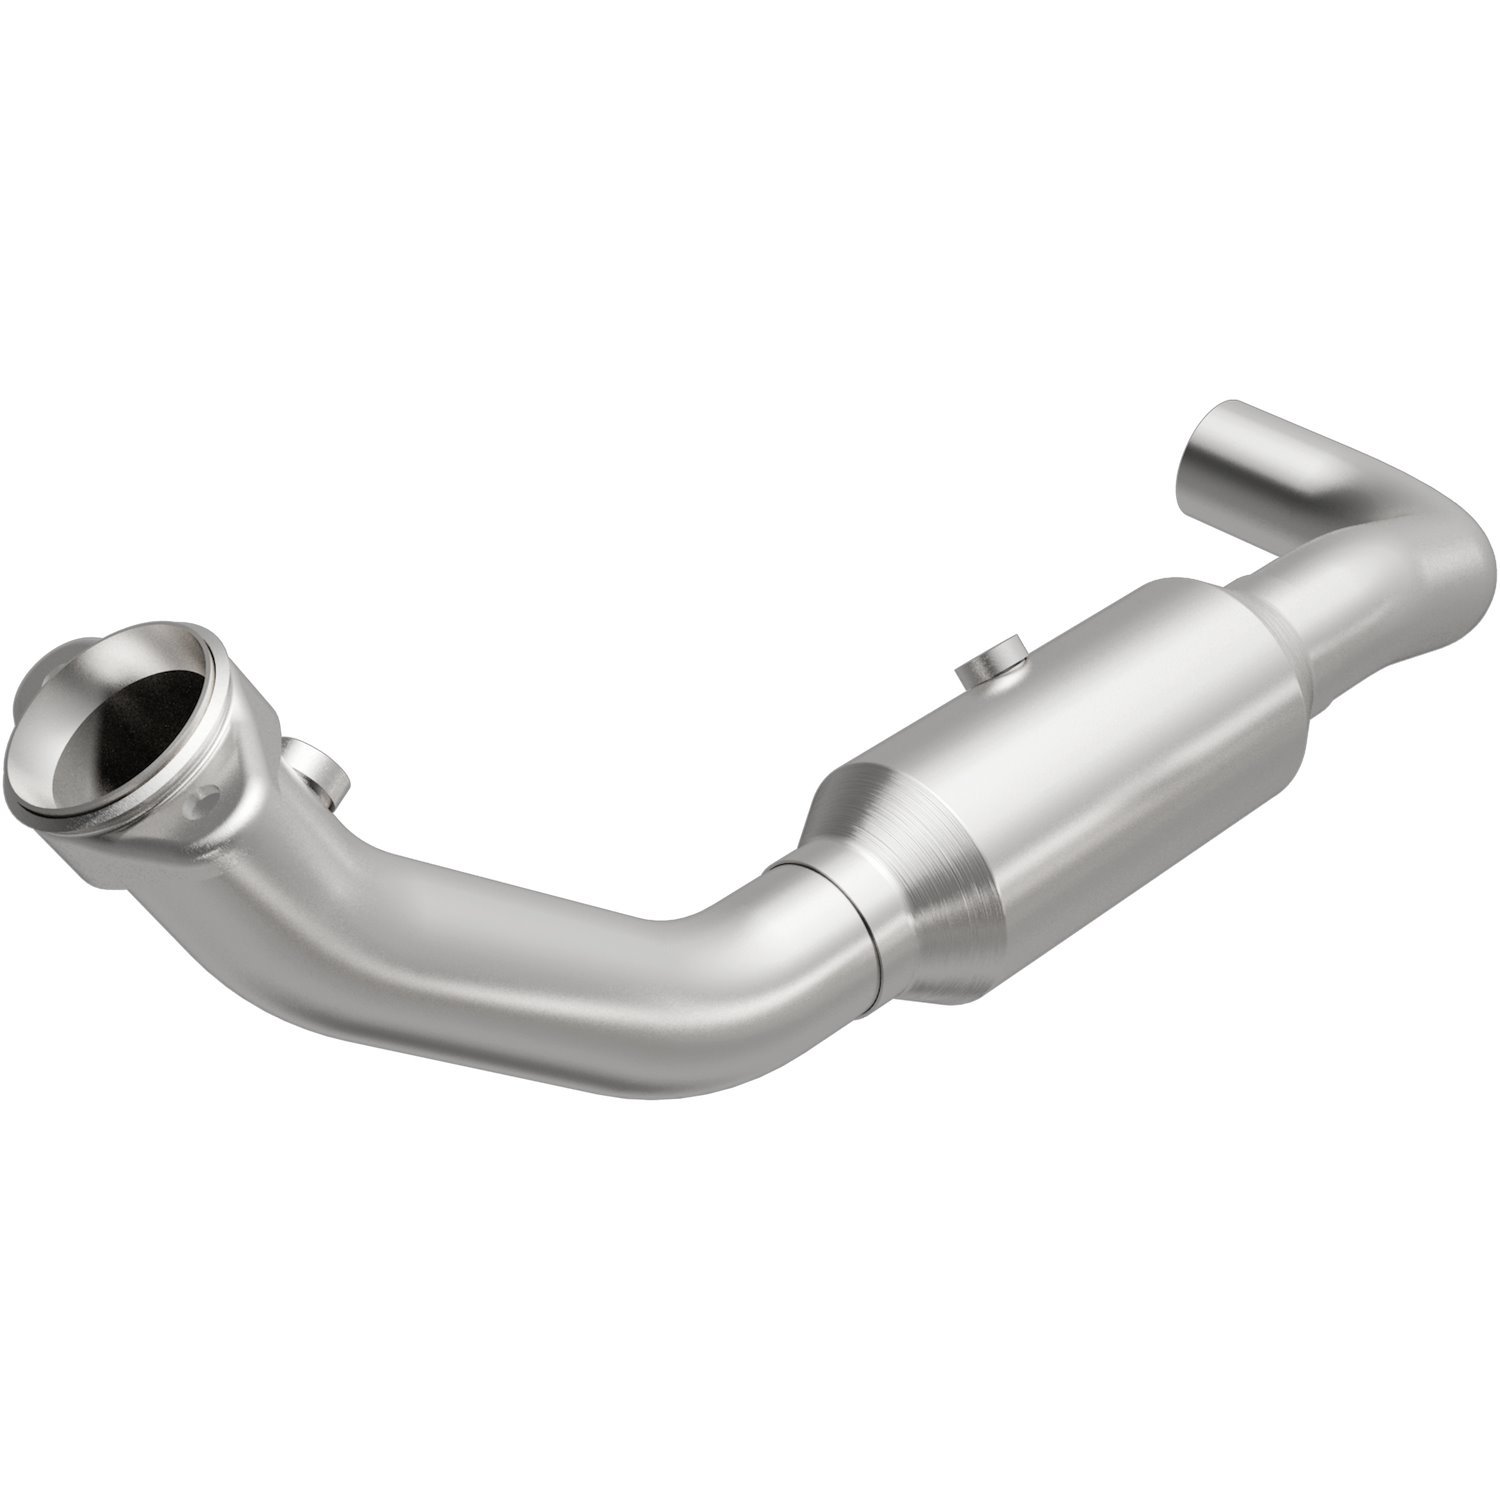 2007-2008 Ford F-150 California Grade CARB Compliant Direct-Fit Catalytic Converter